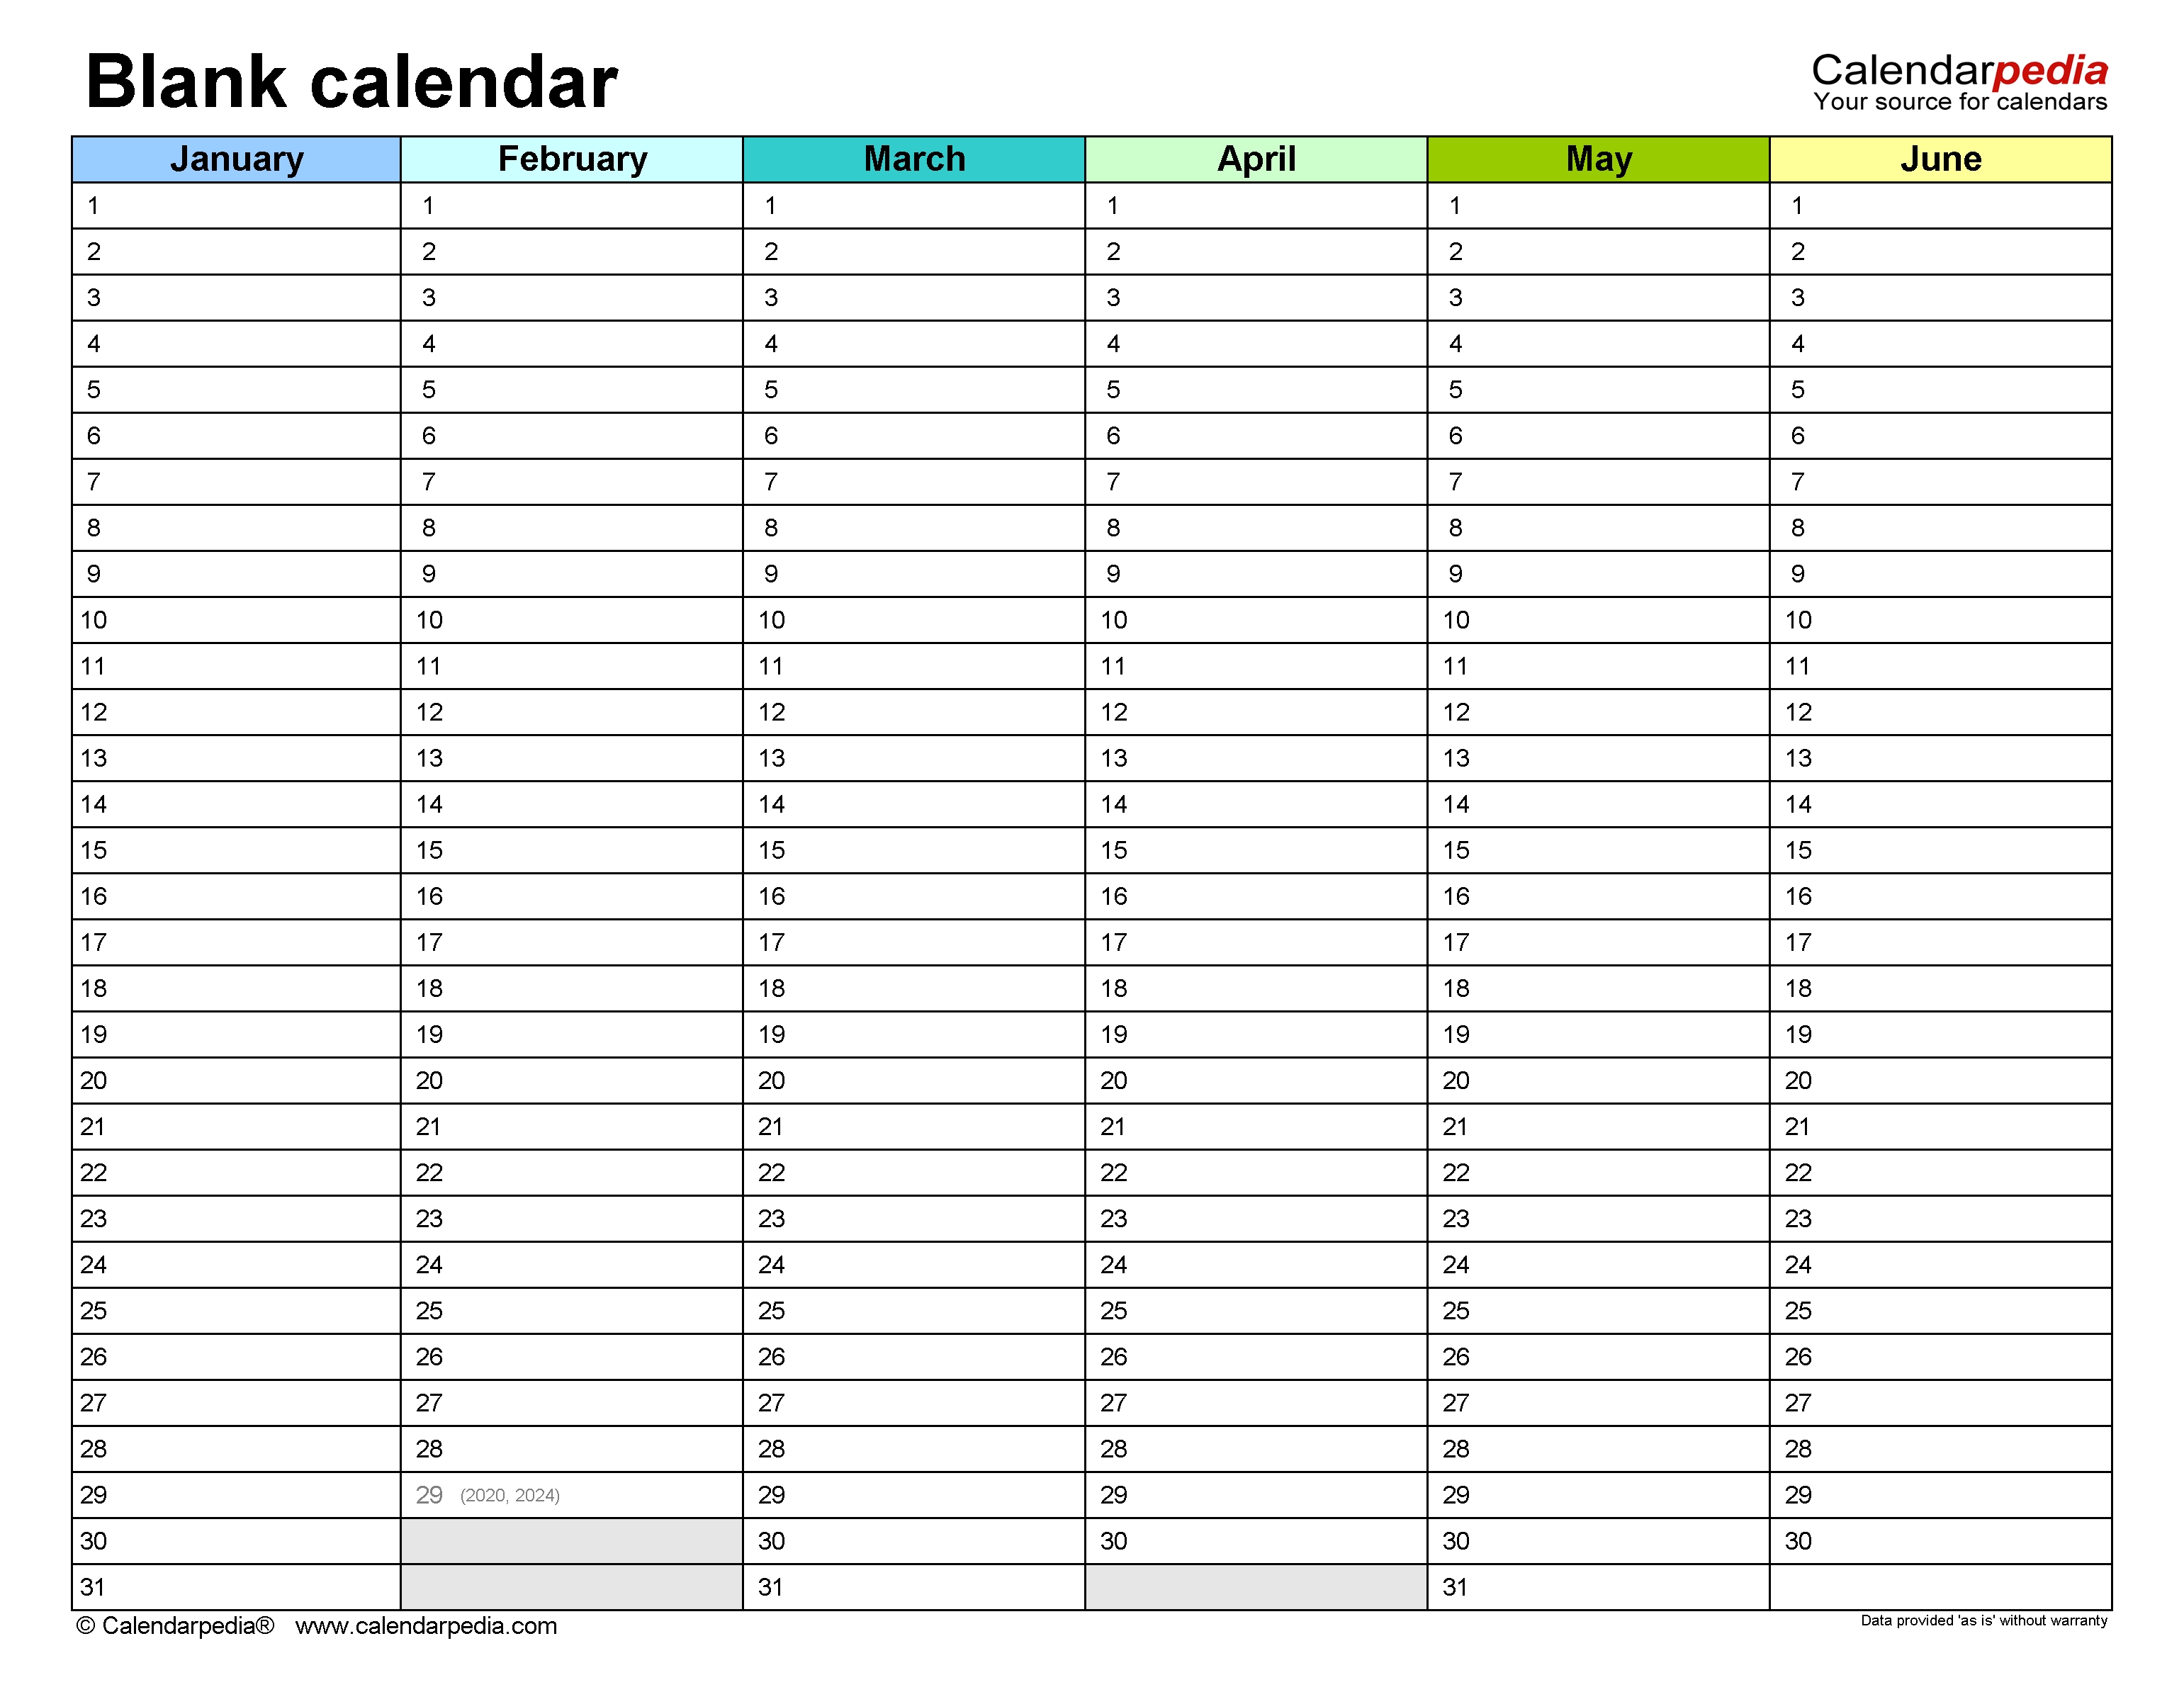 Blank Calendars - Free Printable Microsoft Excel Templates Calendar Template In Pages